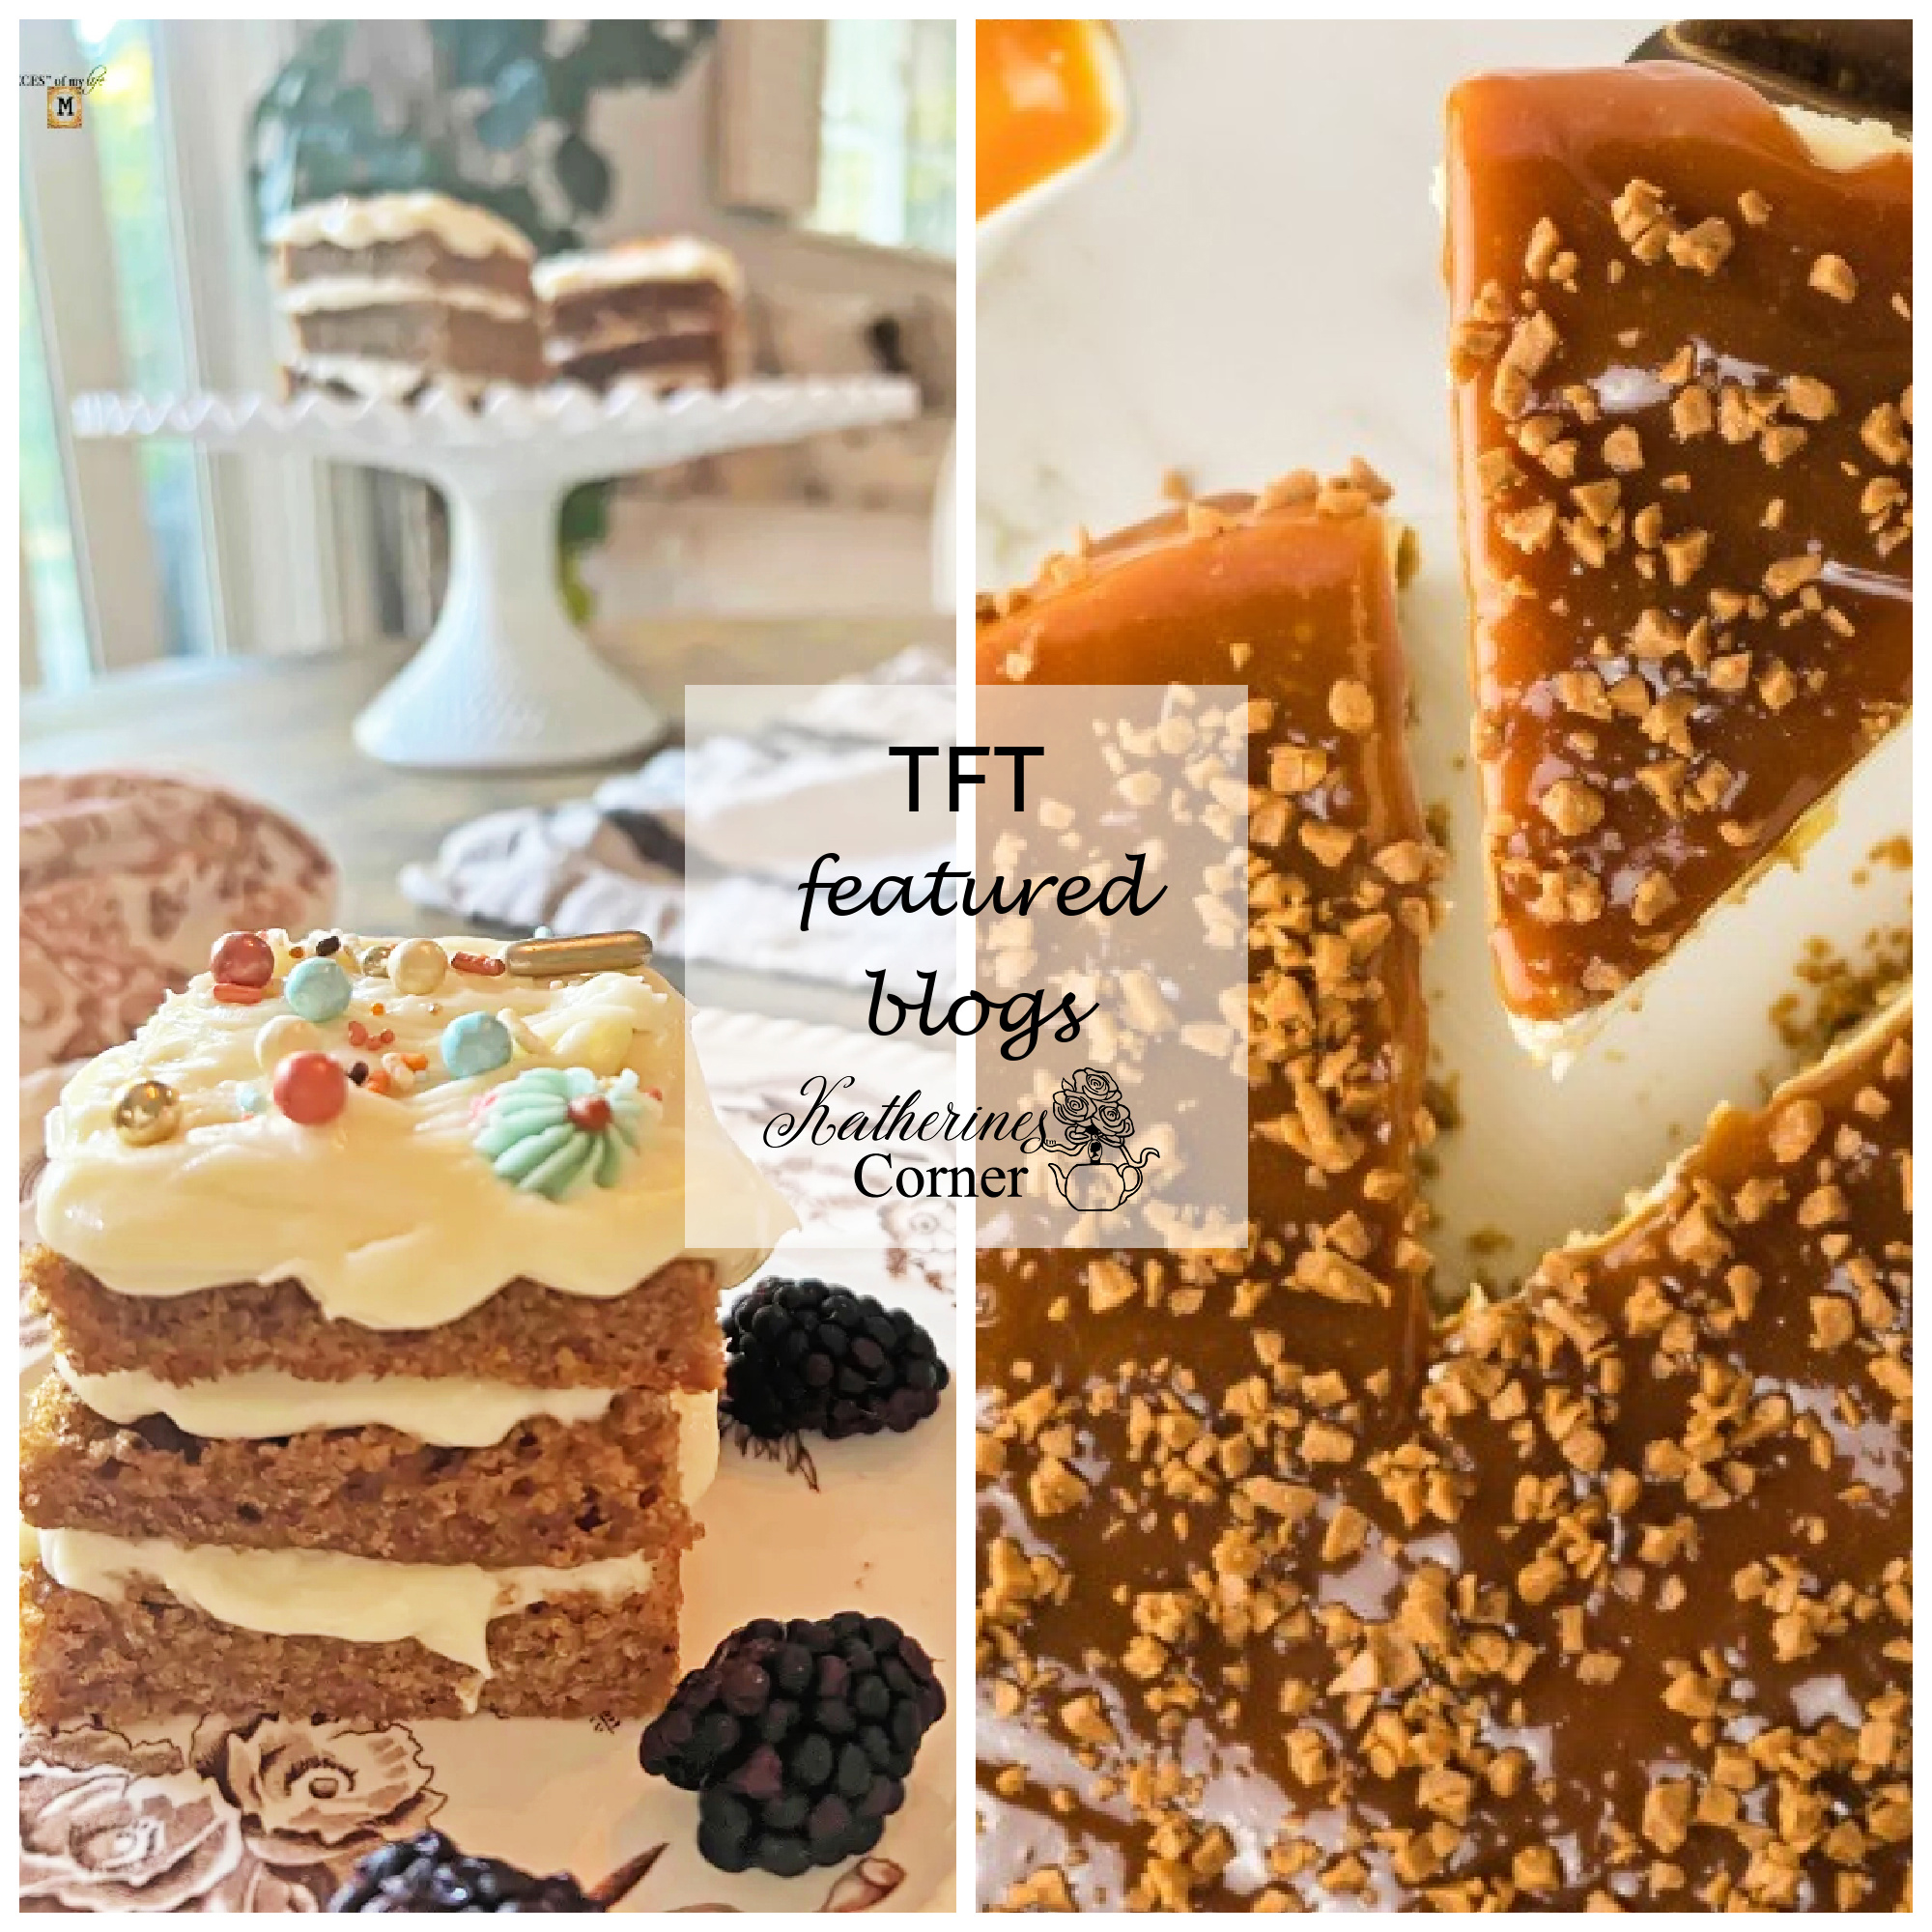 Cake and the TFT Blog Hop